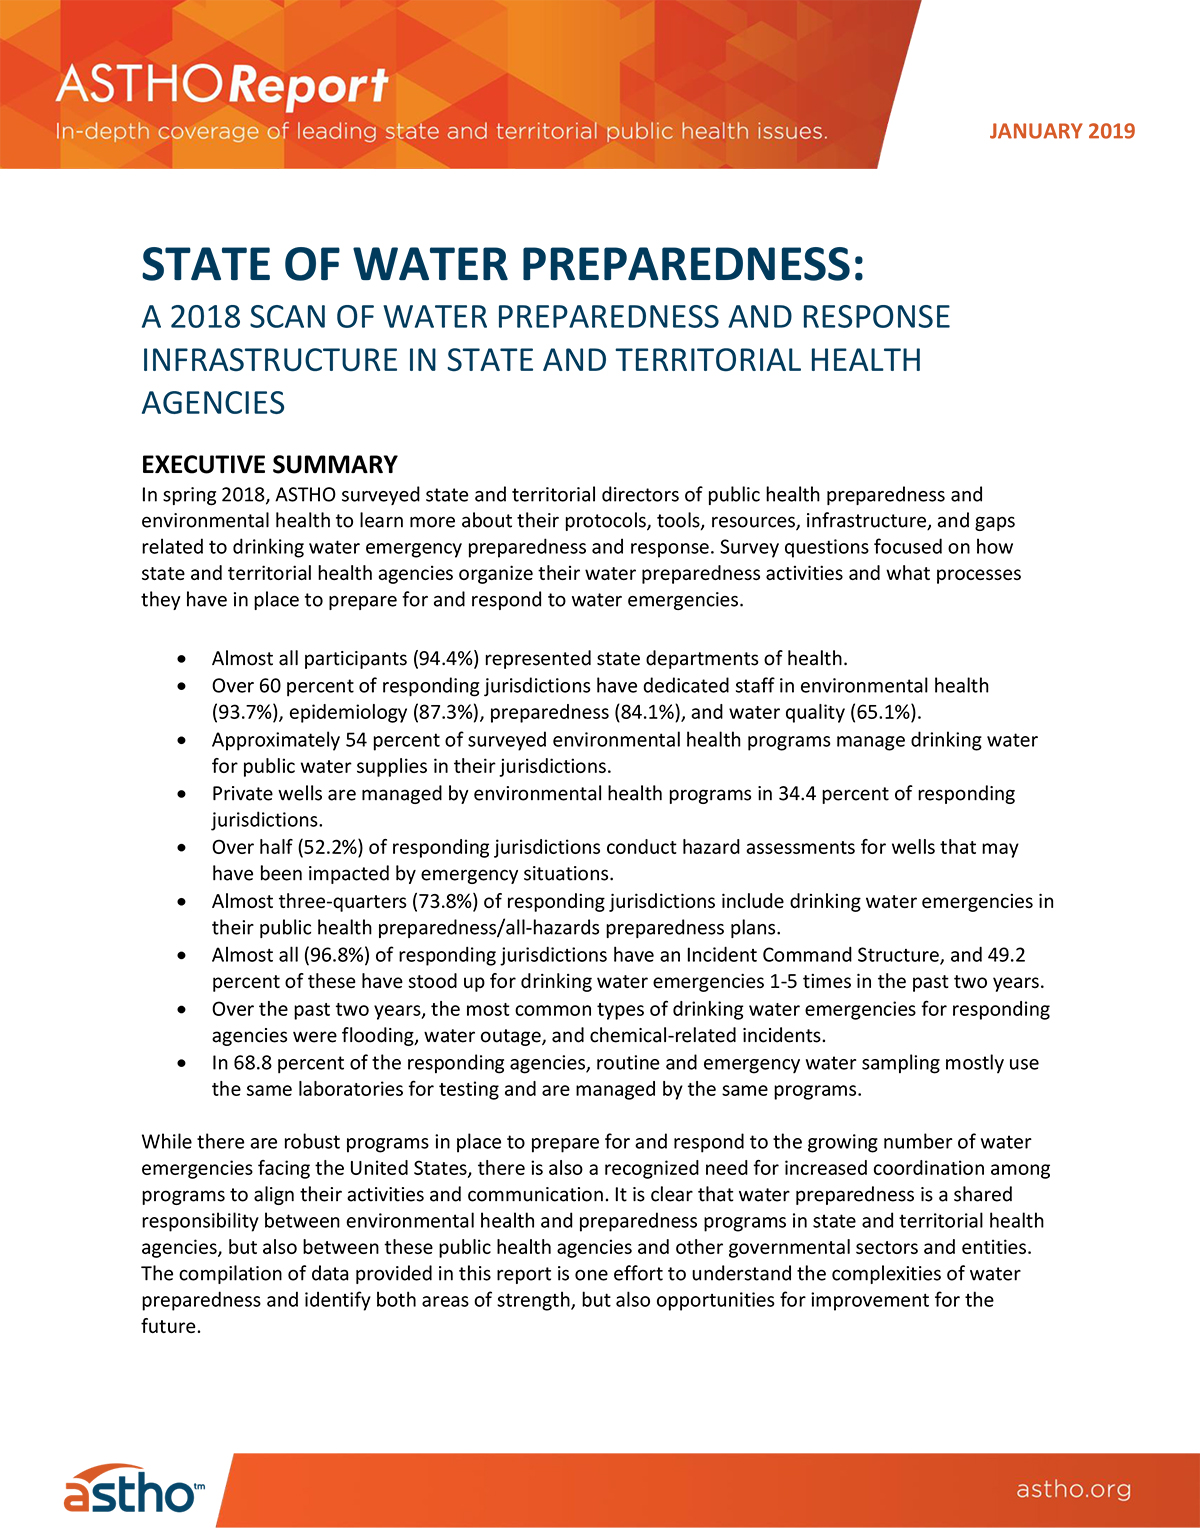 State of Water Preparedness: A 2018 Scan of Water Preparedness and Response Infrastructure in State and Territorial Health Agencies